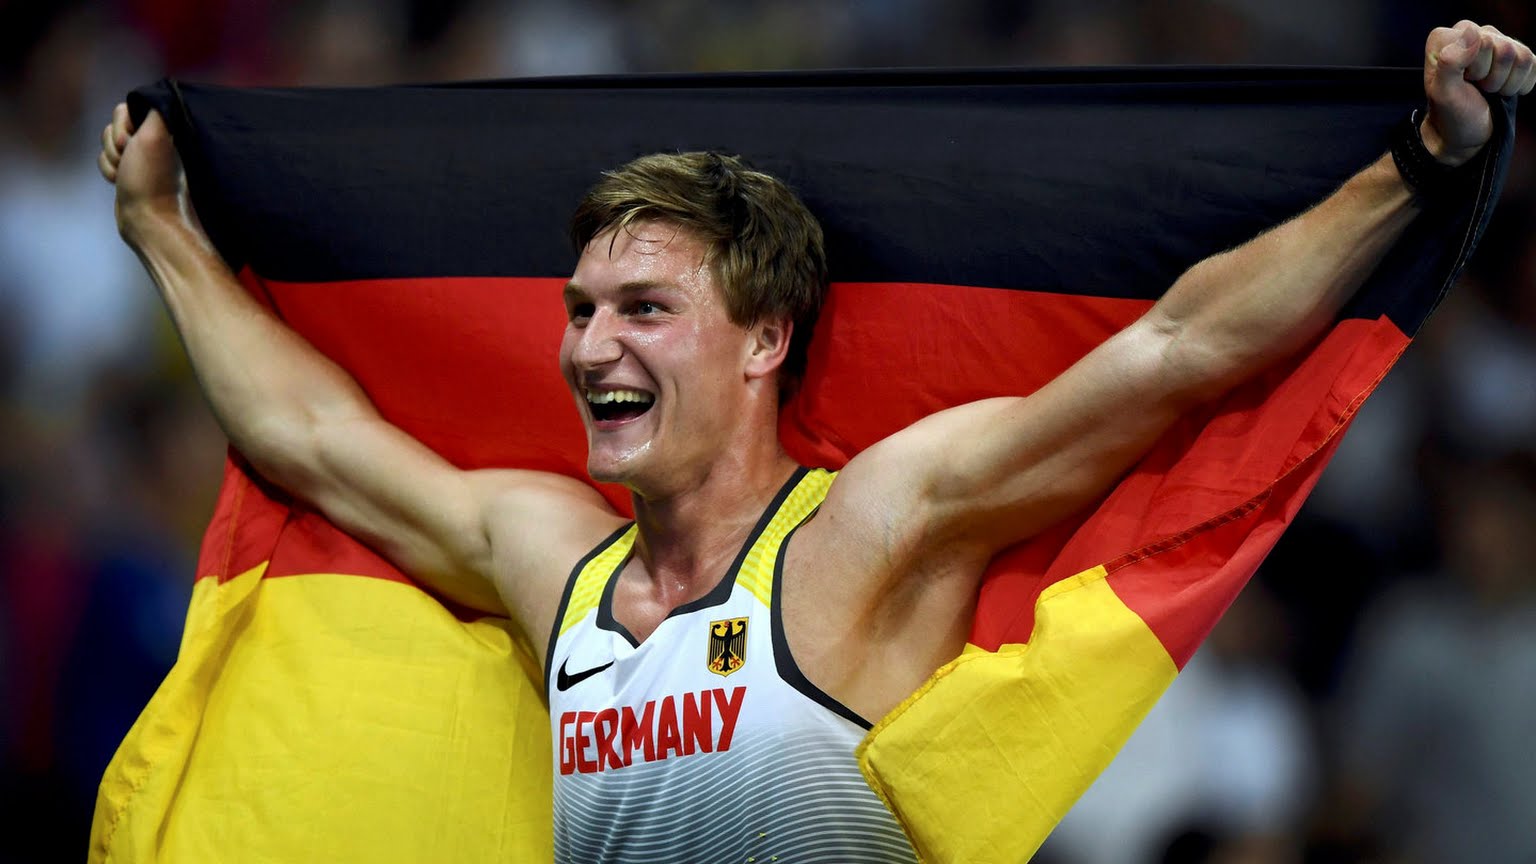 Röhler wins Germany’s 1st Javelin GOLD in 44 years at Rio Olympics ...